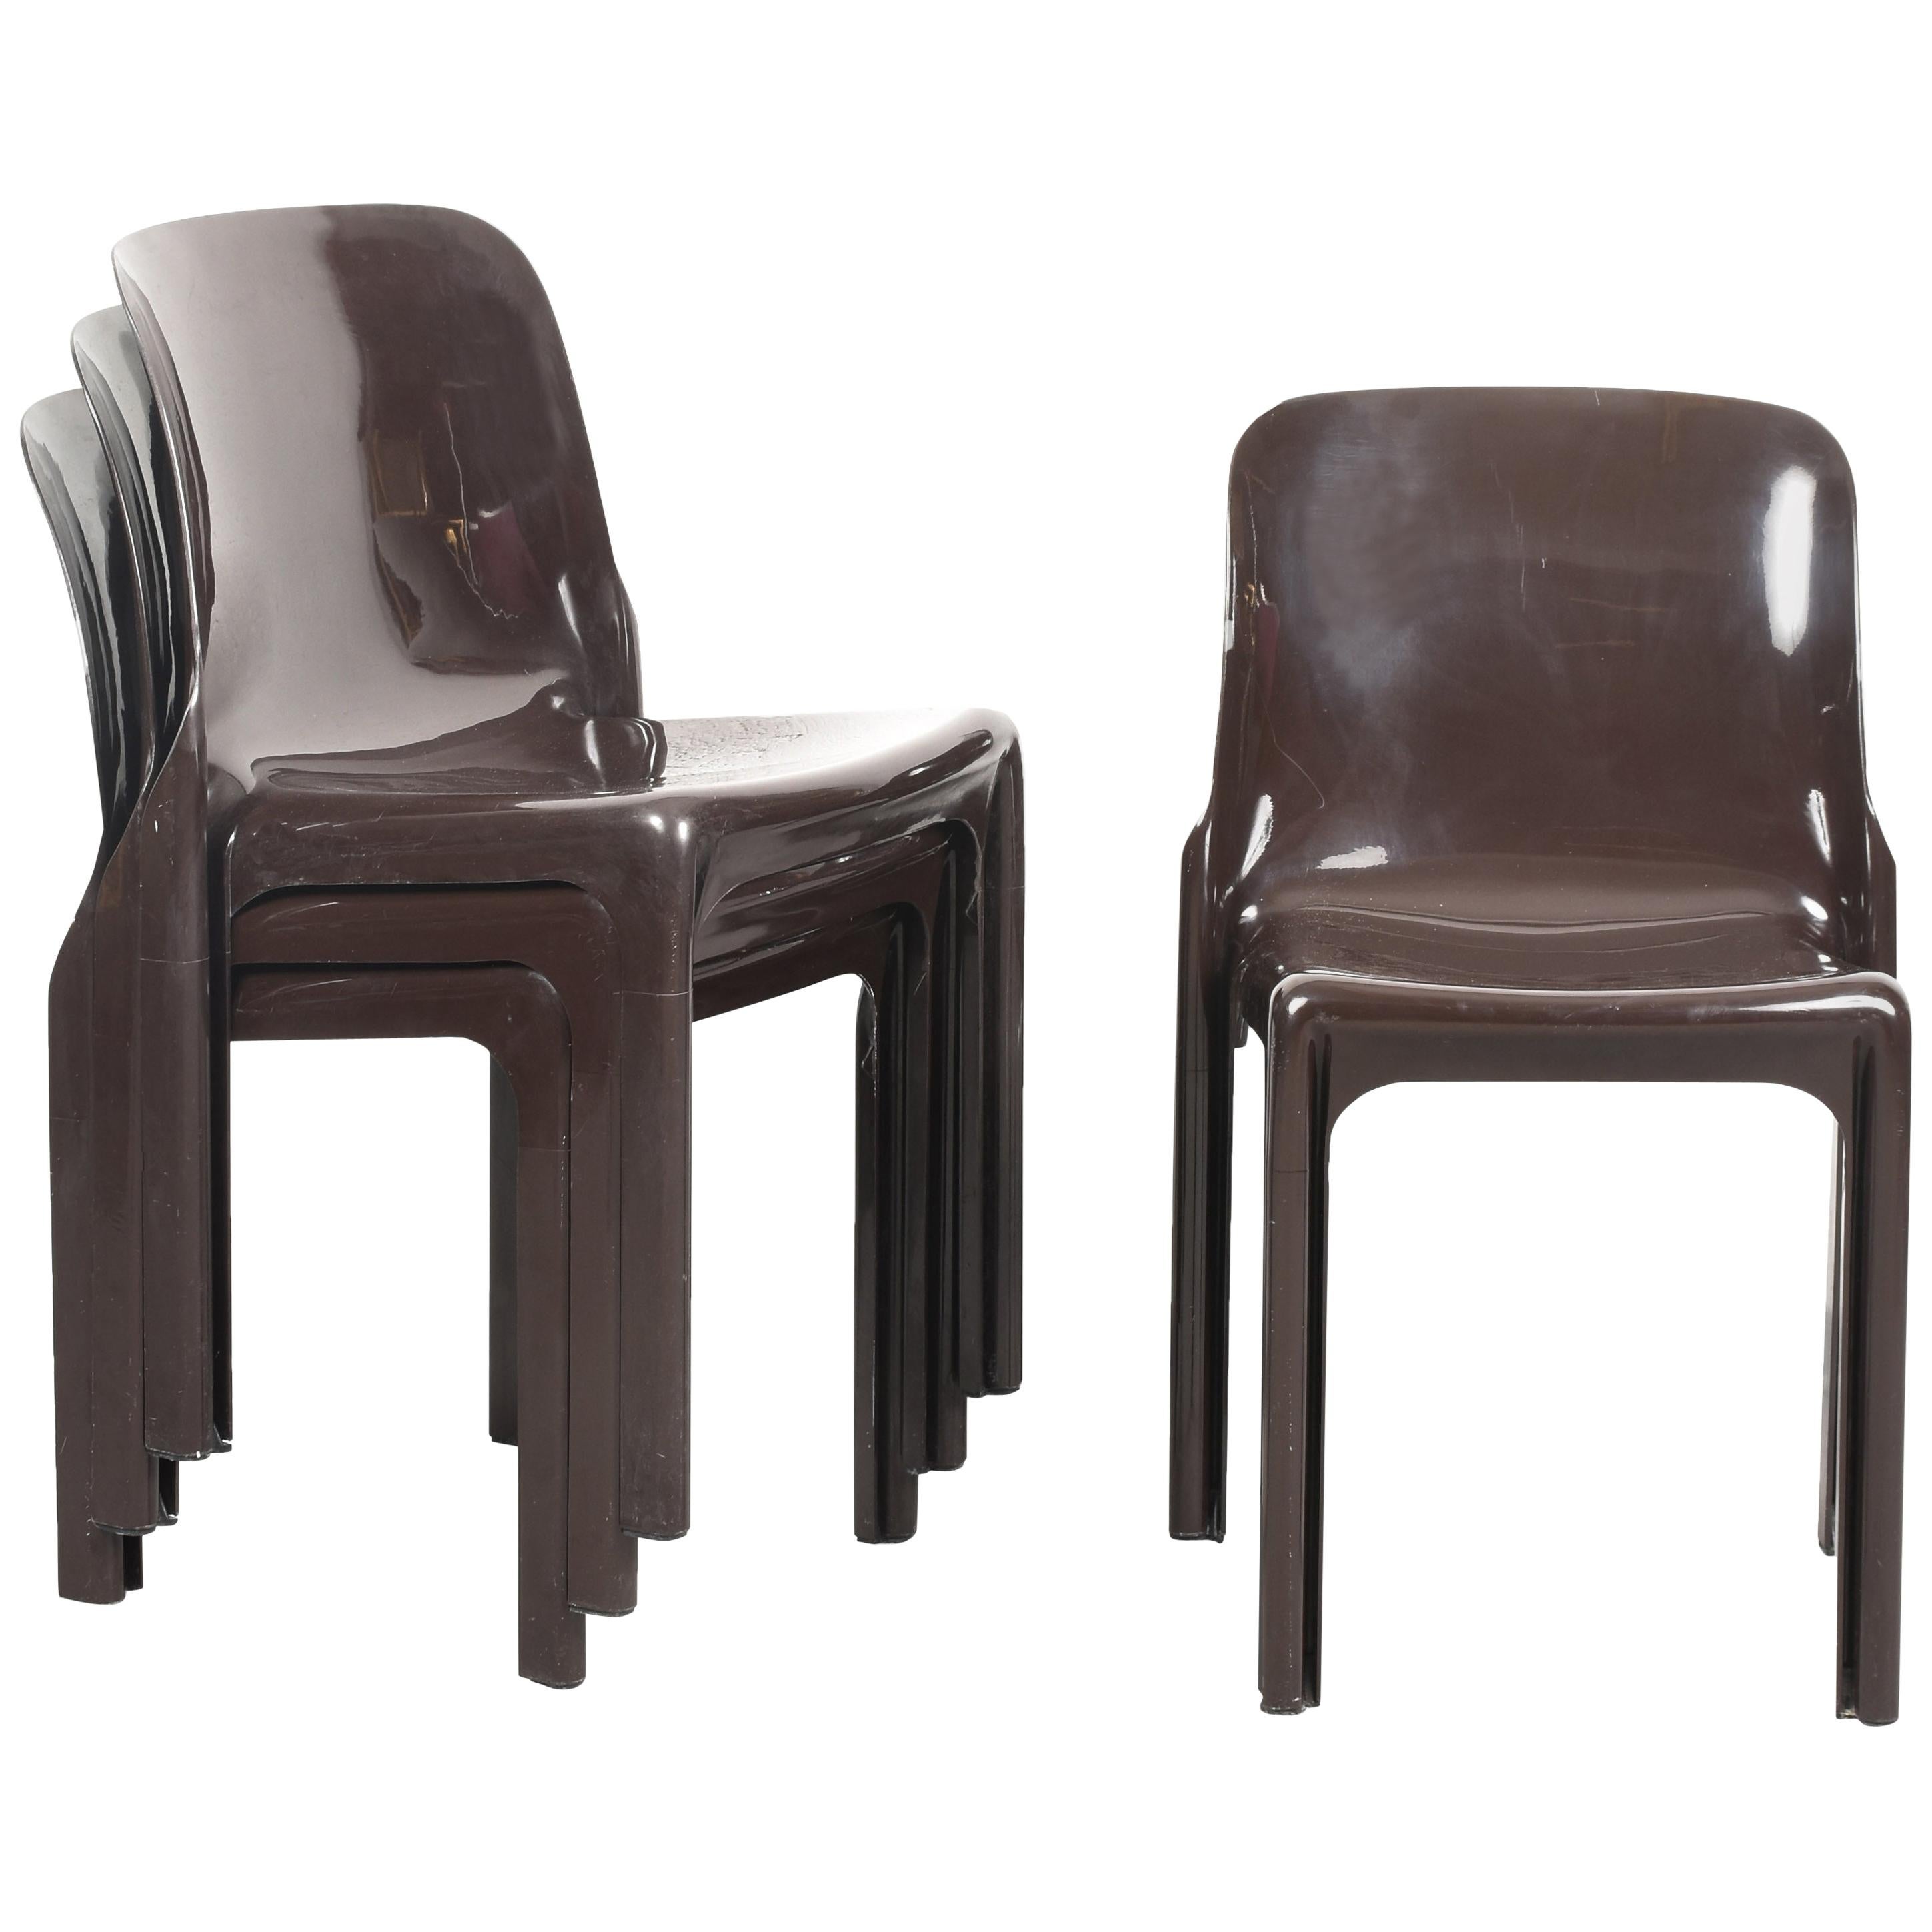 Set of Four Selene Chairs Brown by Vico Magistretti for Artemide, Italy, 1960s